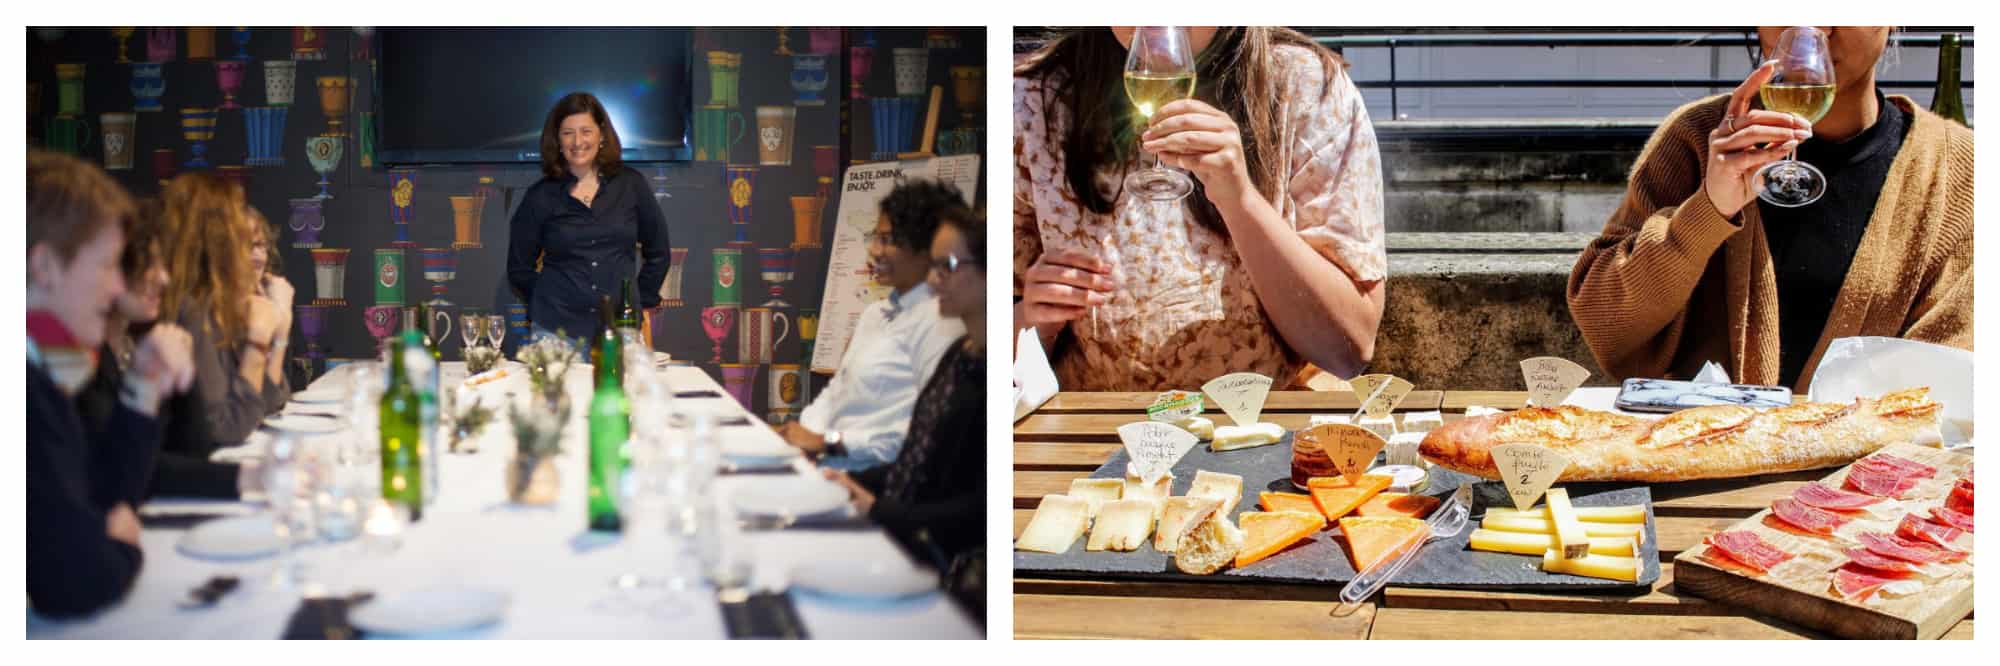 On left: Cynthia Coutu of Delectabulles, her champagne master class company, hosts a workshop dinner for an intimate group of attendees. On right: Two guests enjoy glasses of wine and cheese and charcuterie boards at a tasting tour with Flavors of Paris, founded by Lisa Rankin. 